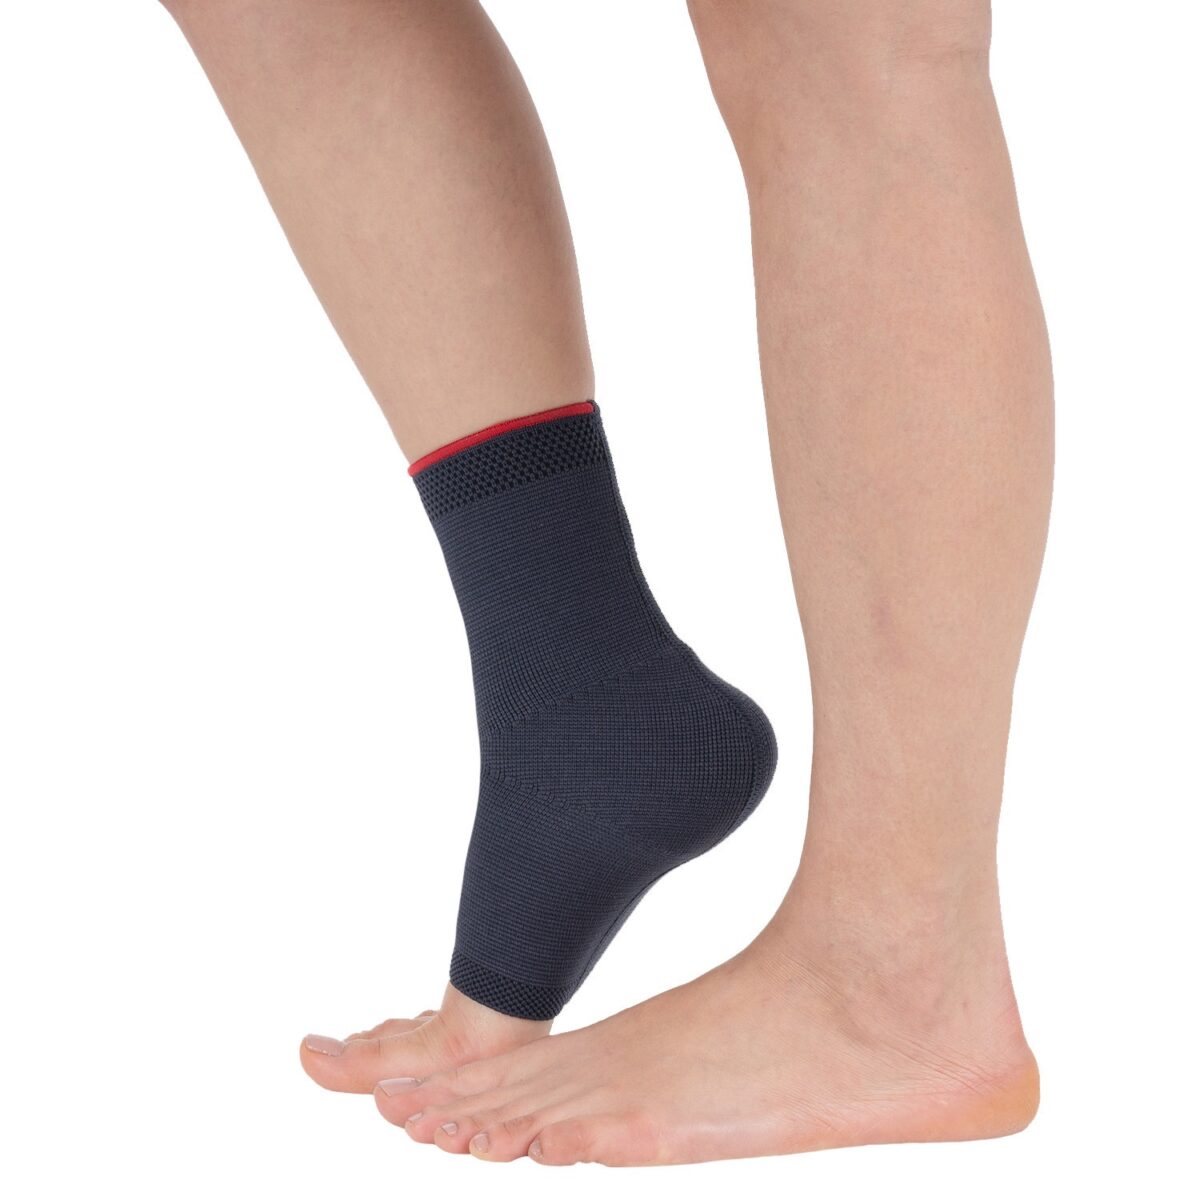 wingmed orthopedic equipments W602 woven ankle support 23 1 1